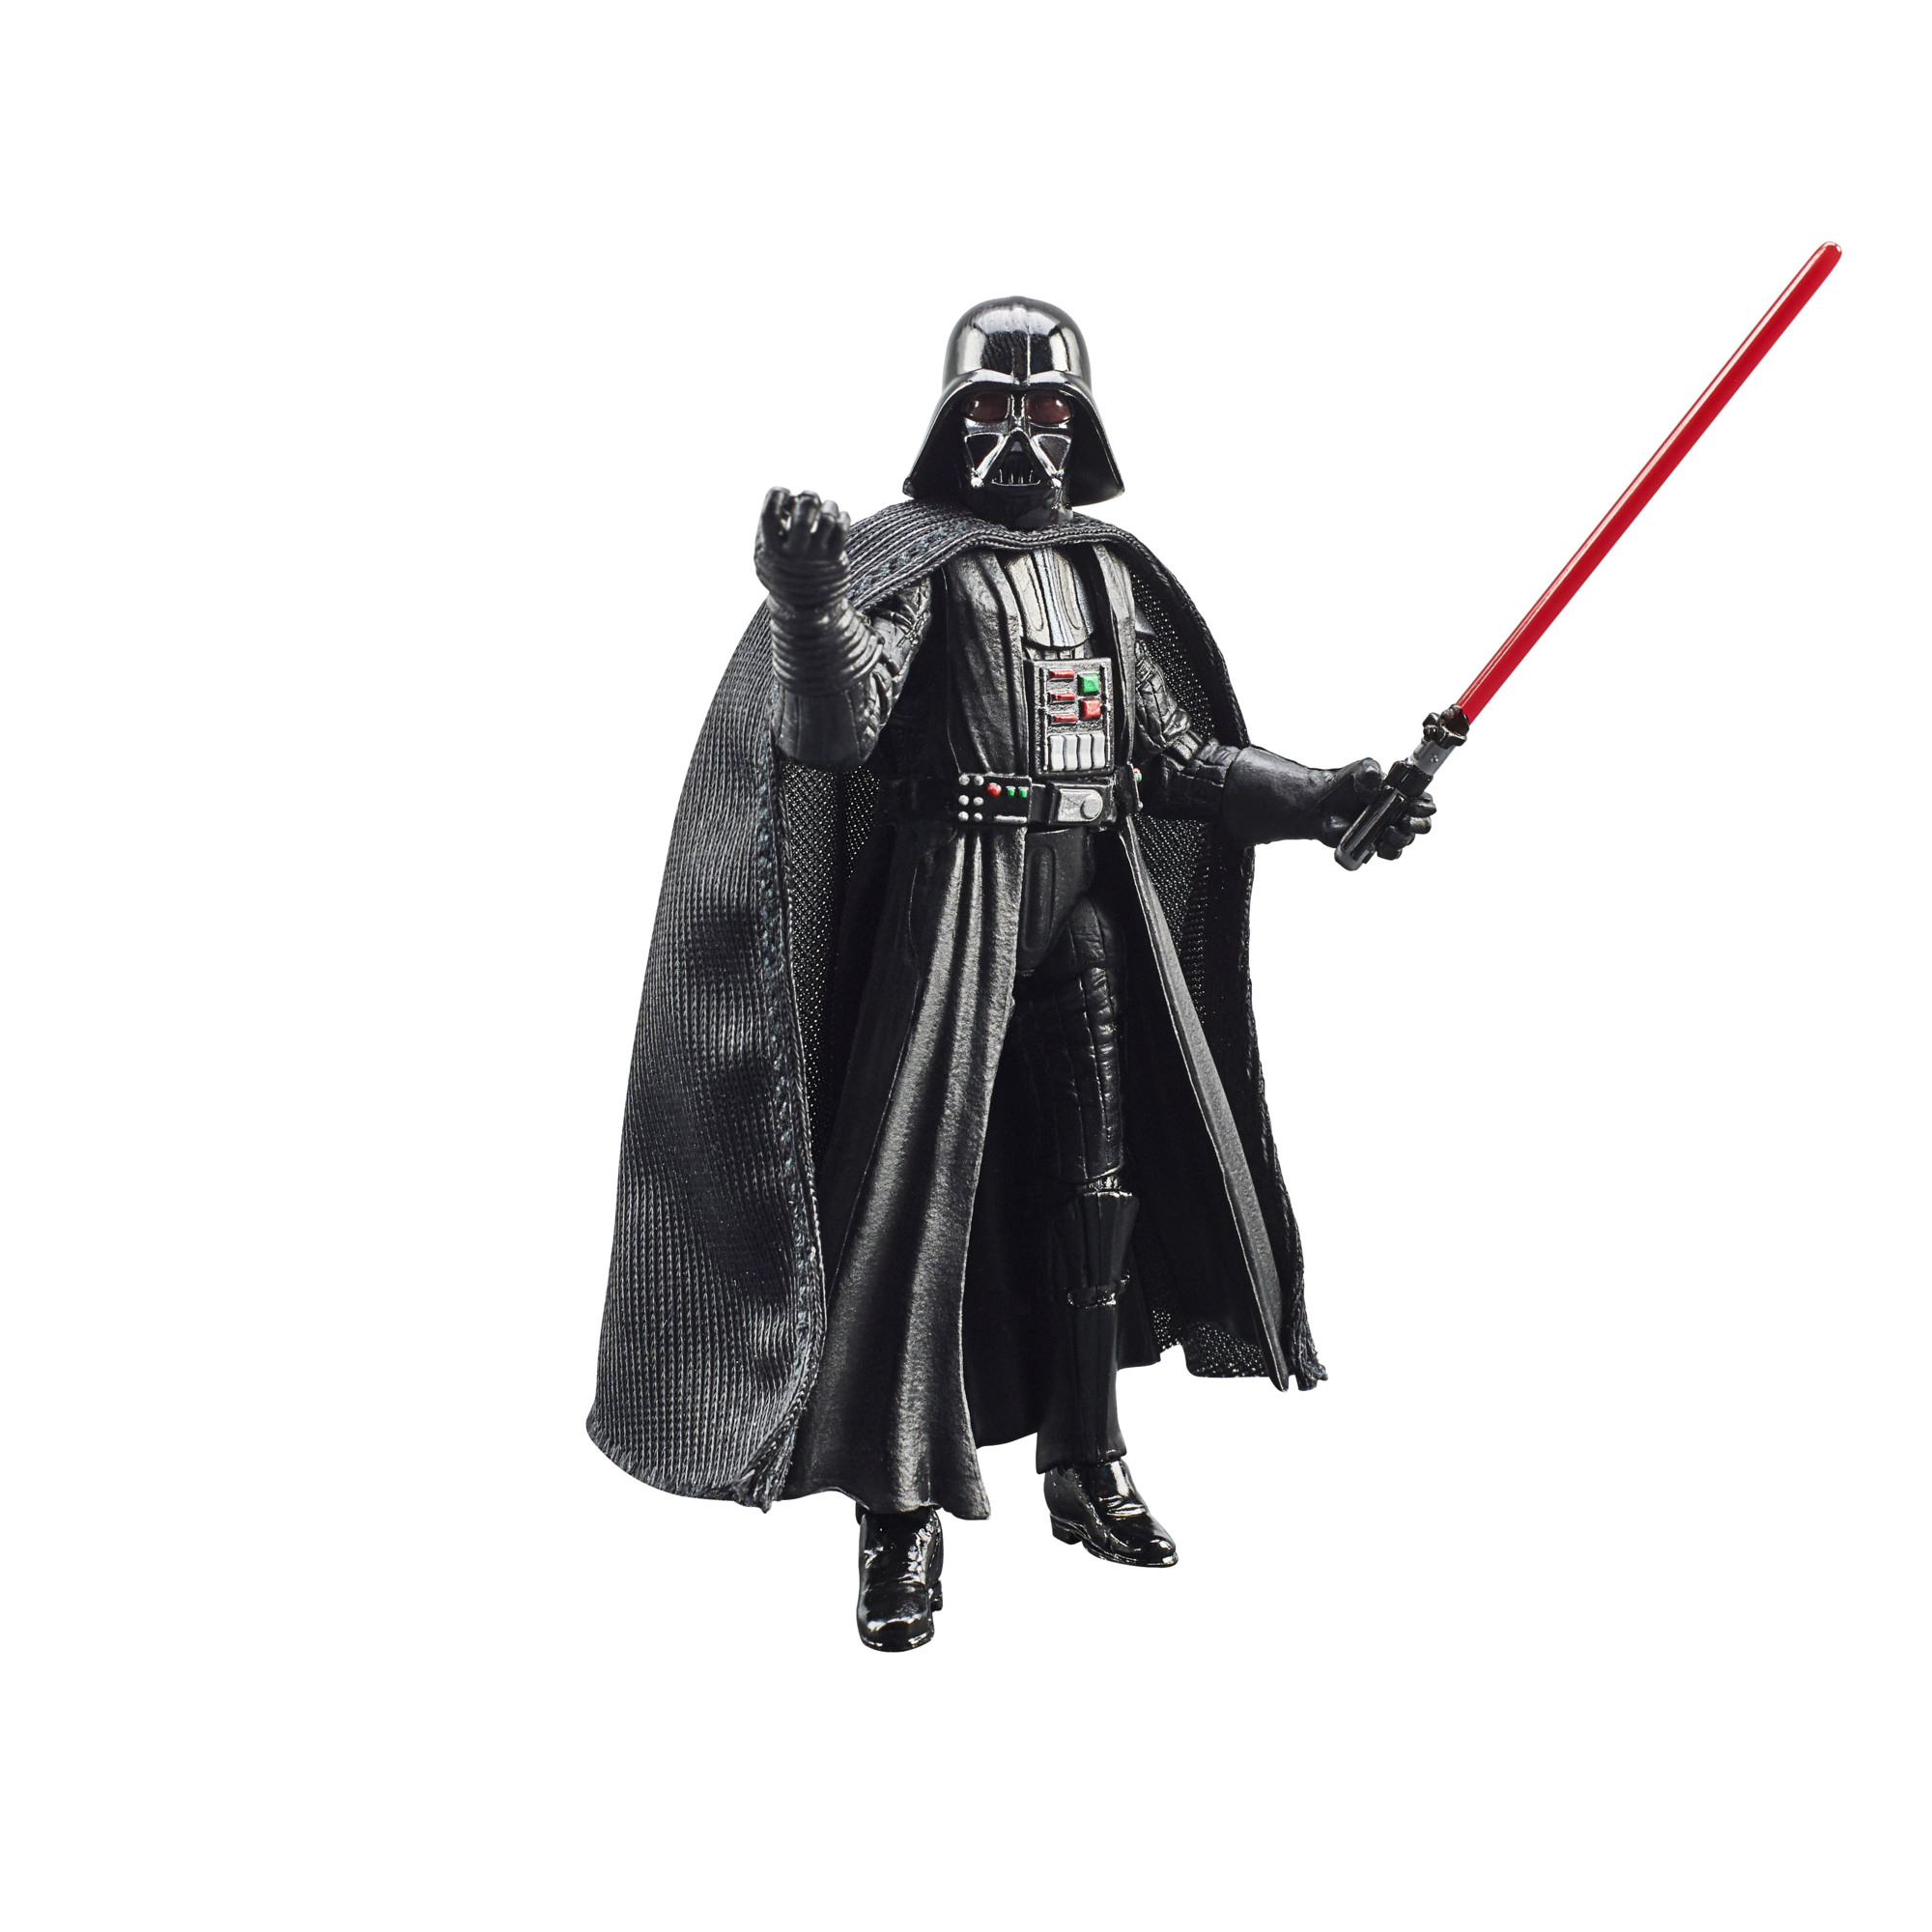 Star Wars The Vintage Collection Darth Vader Toy, 3.75 Inch Scale, Walmart Exclusive